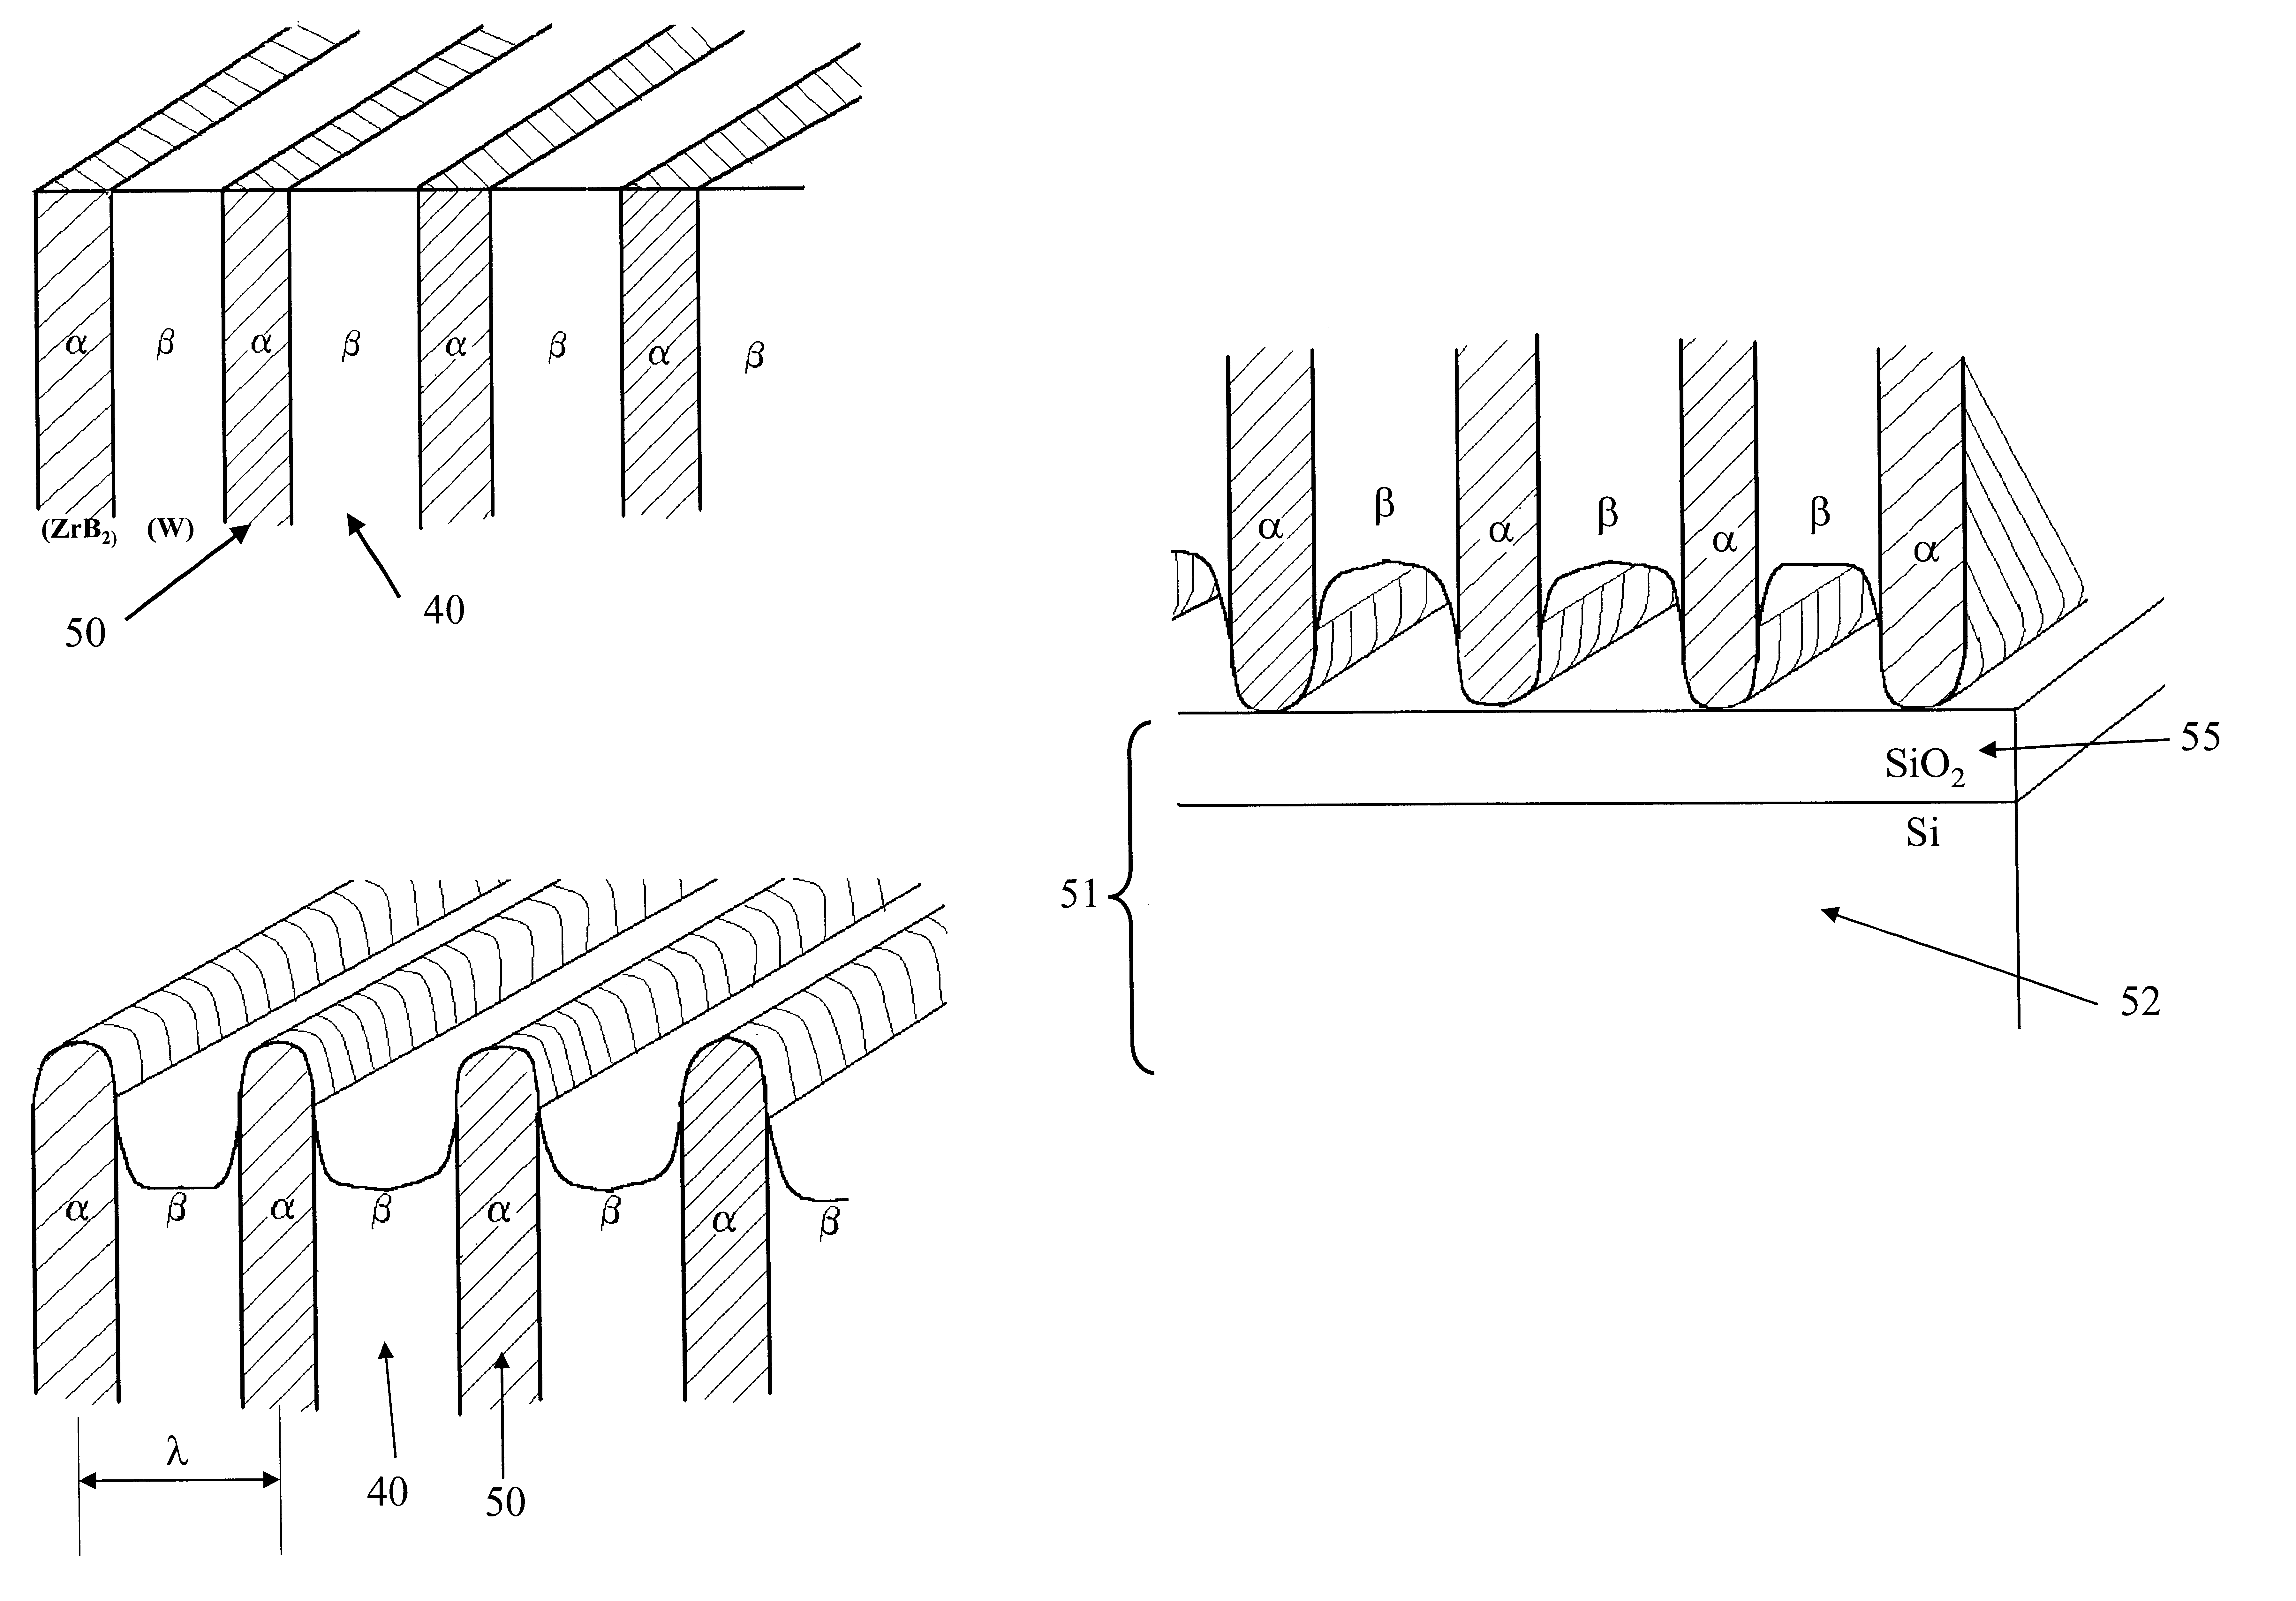 Method for making a nano-stamp and for forming, with the stamp, nano-size elements on a substrate